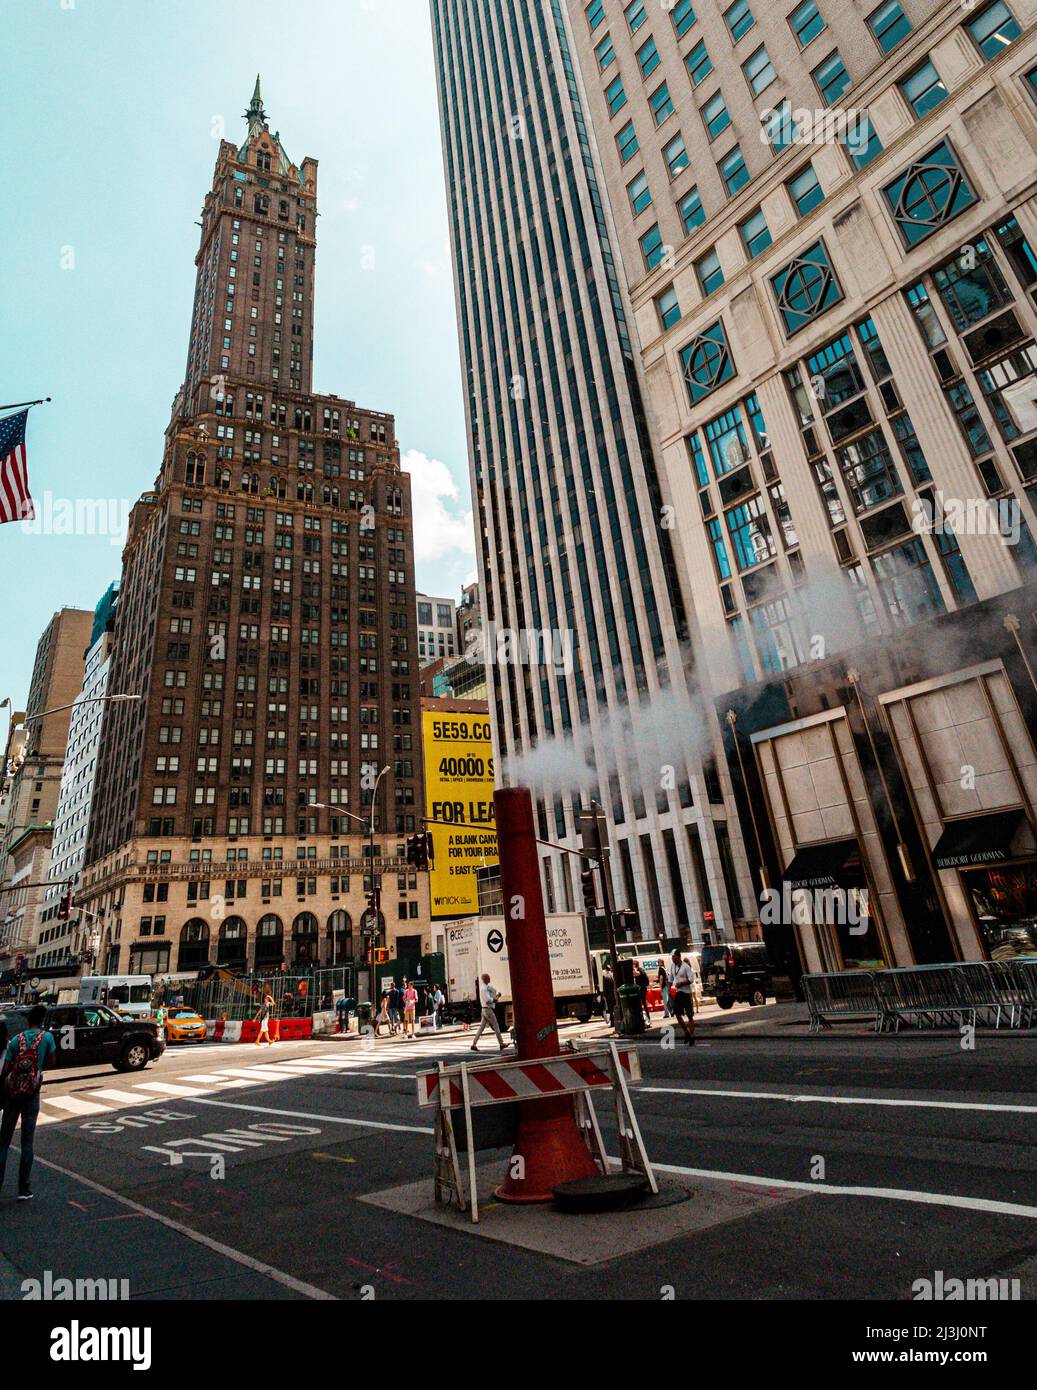 5 AV/W 58 ST, New York City, NY, USA, The typical New York City street view. Busy life, people, stores, American flags, cars and a steam vent in the middle of the street. Stock Photo